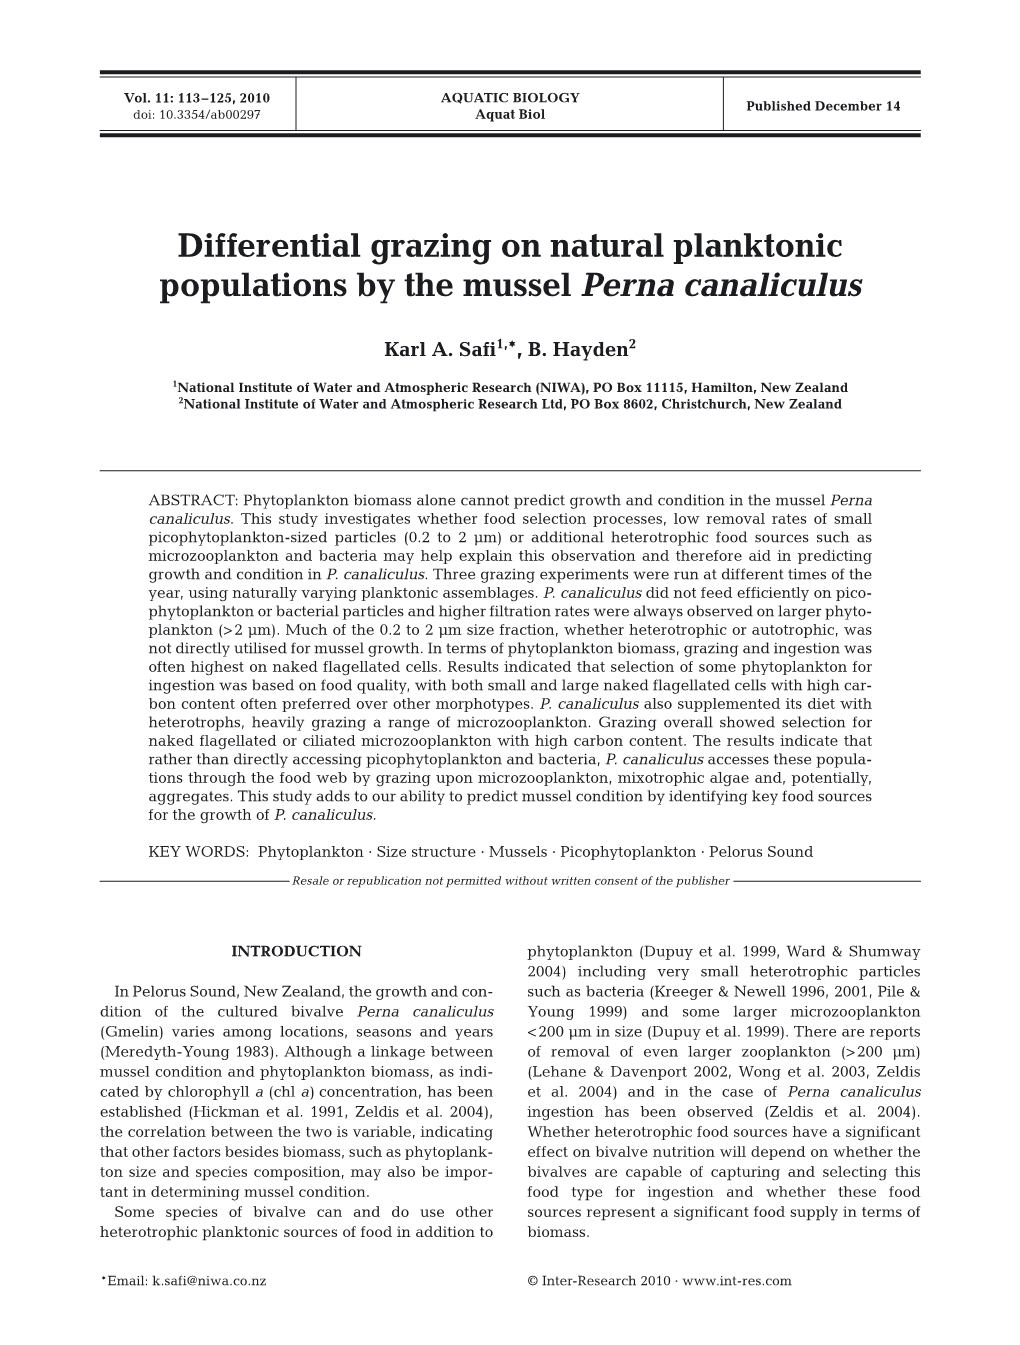 Differential Grazing on Natural Planktonic Populations by the Mussel Perna Canaliculus